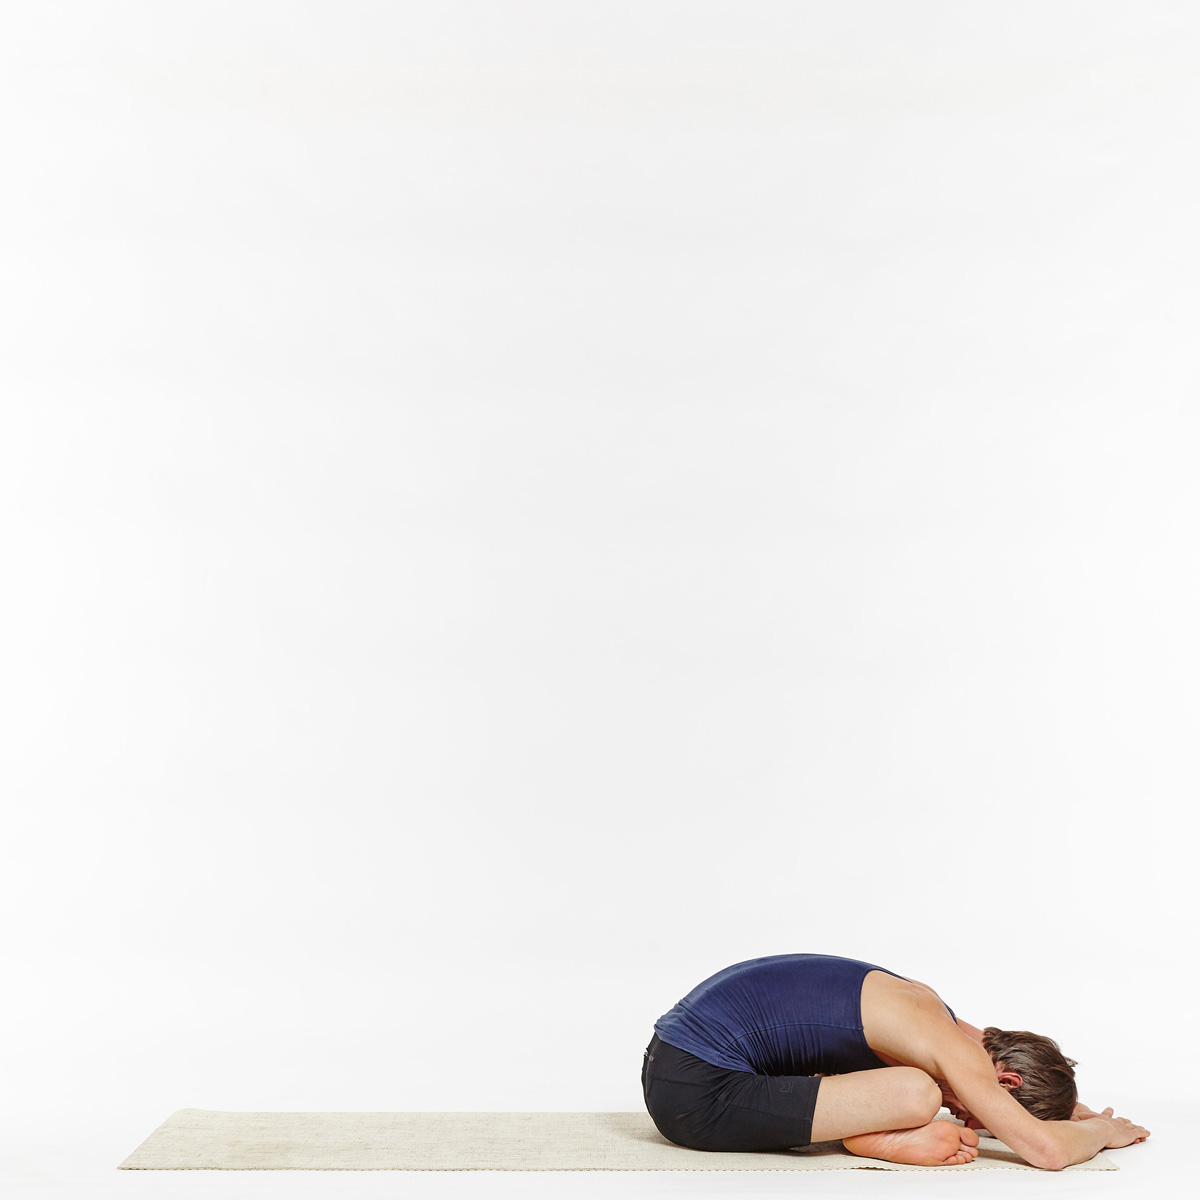 Lizard Pose or Utthan Pristhasana: Benefits and How to do it | HealthShots